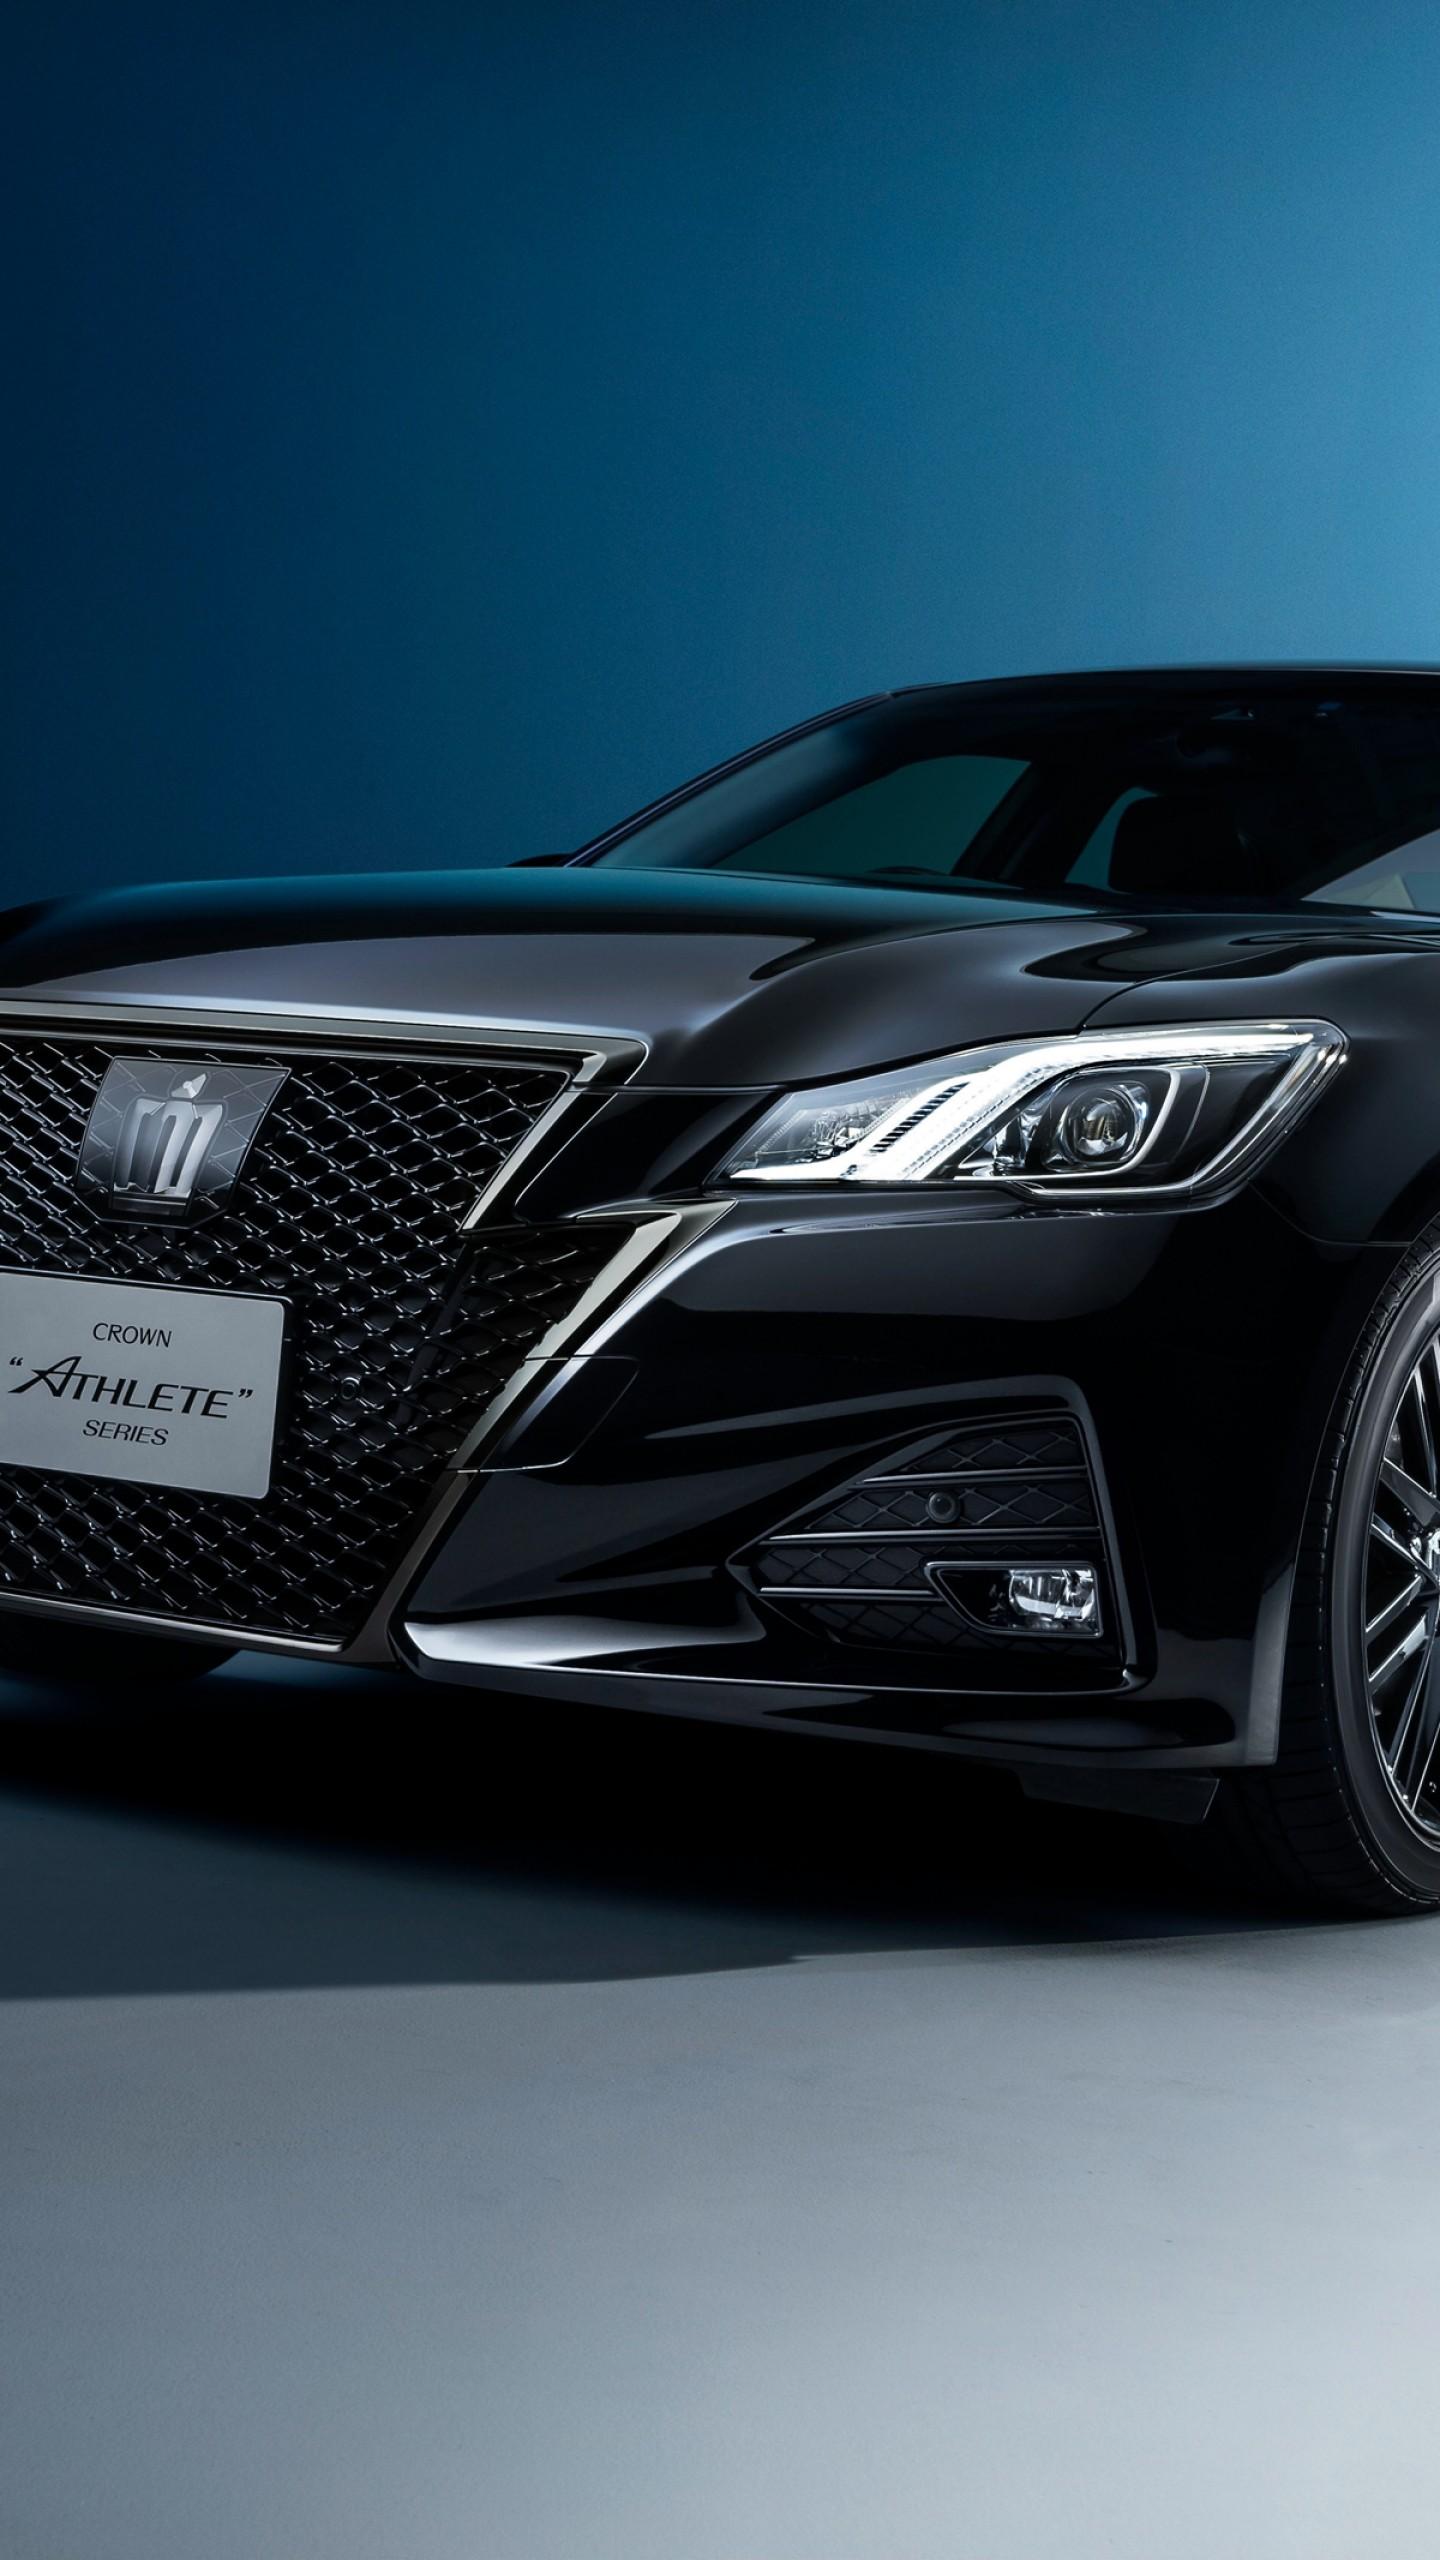 Toyota Crown Wallpapers